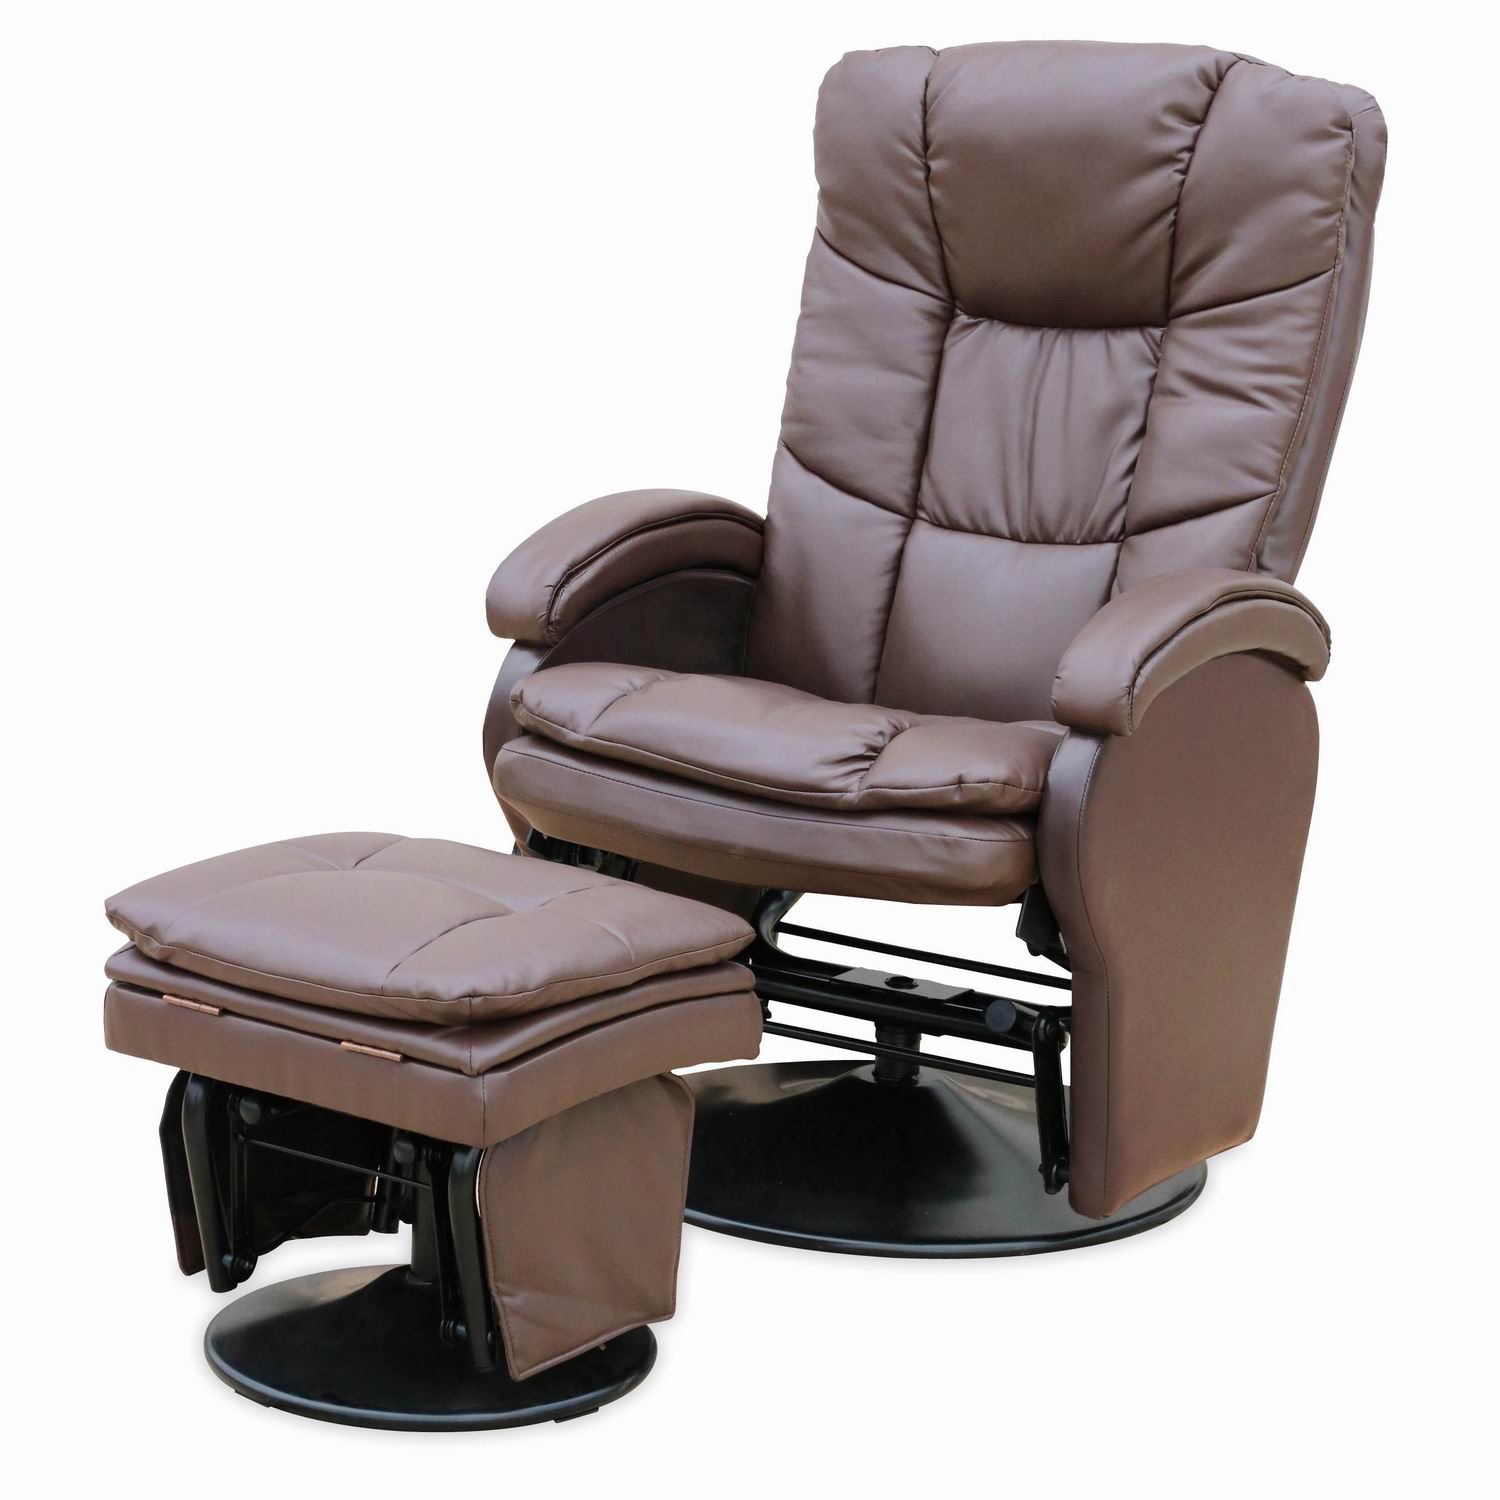 Metal Gliding Chair with ottoman